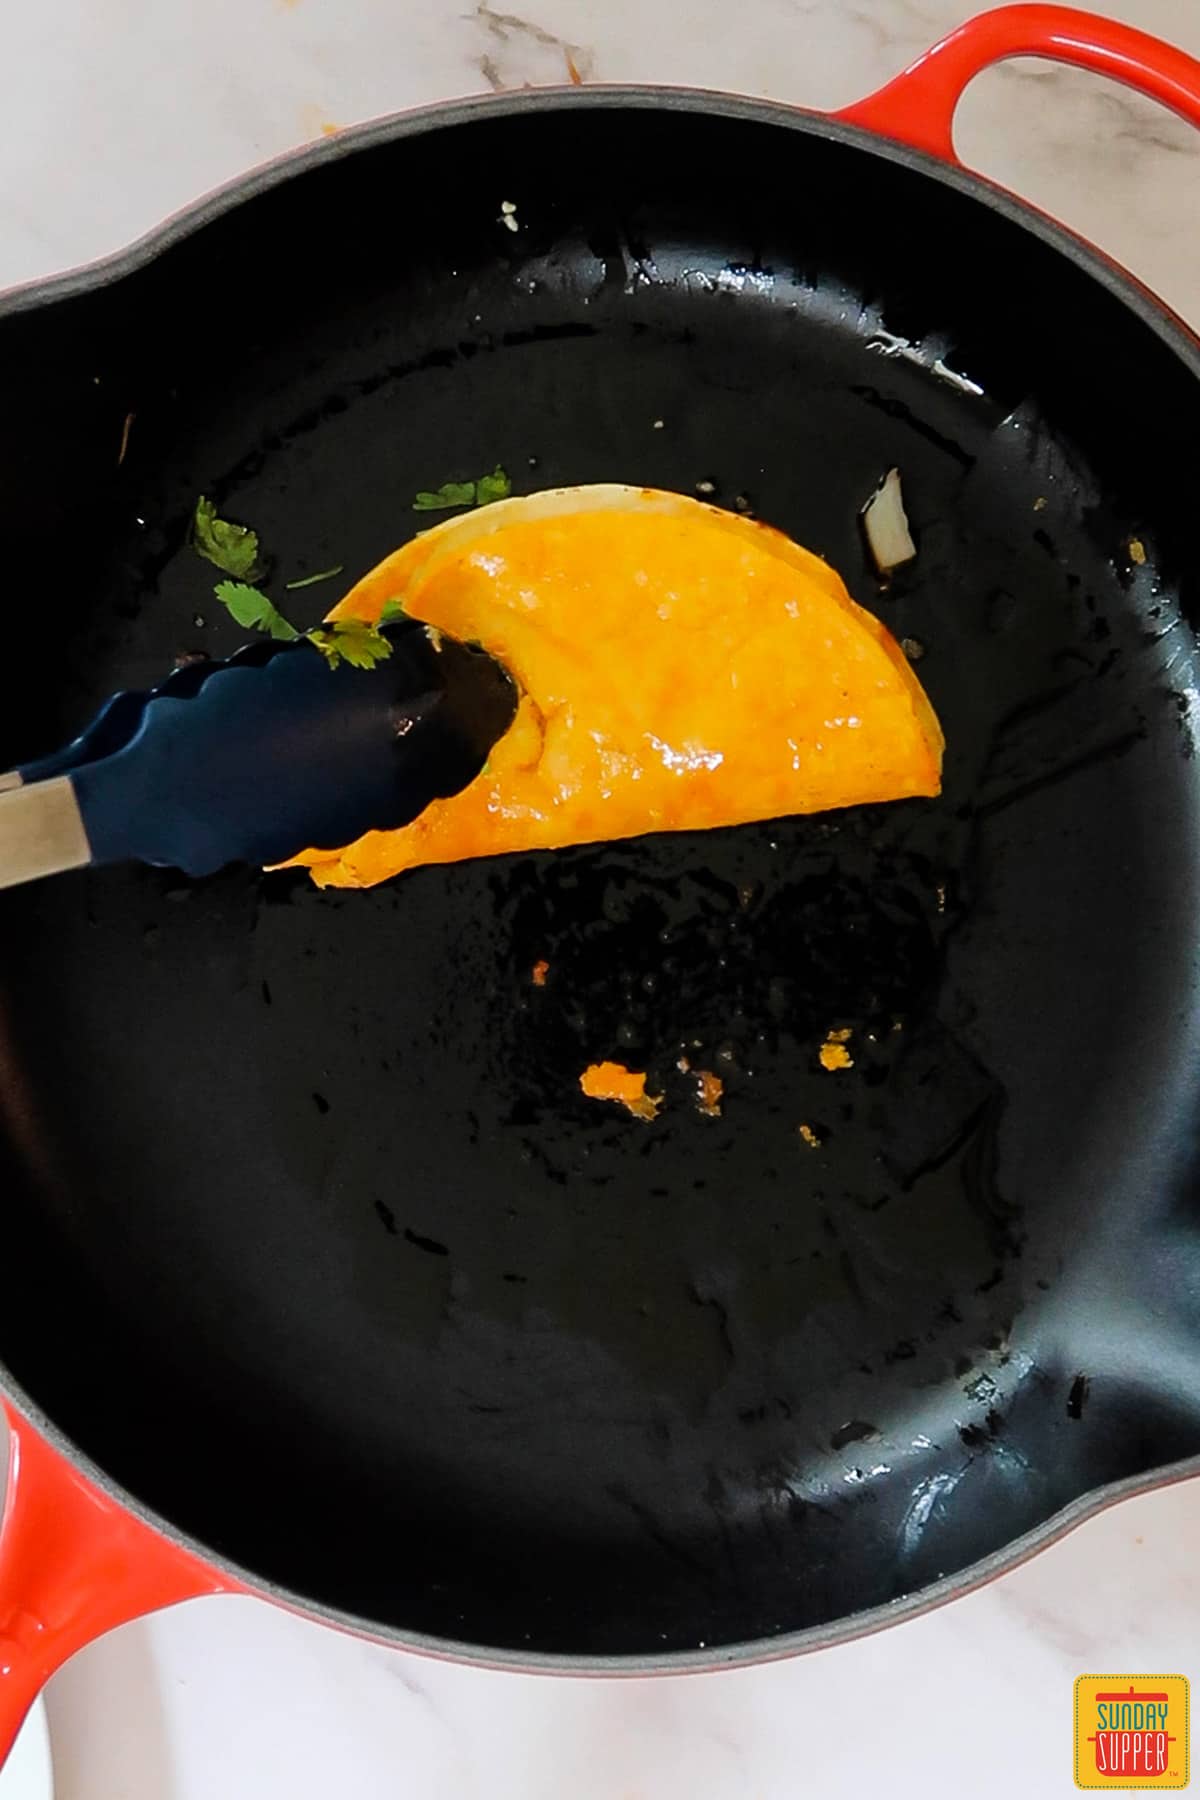 tongs flipping over a quesabirria taco on a black frying pan